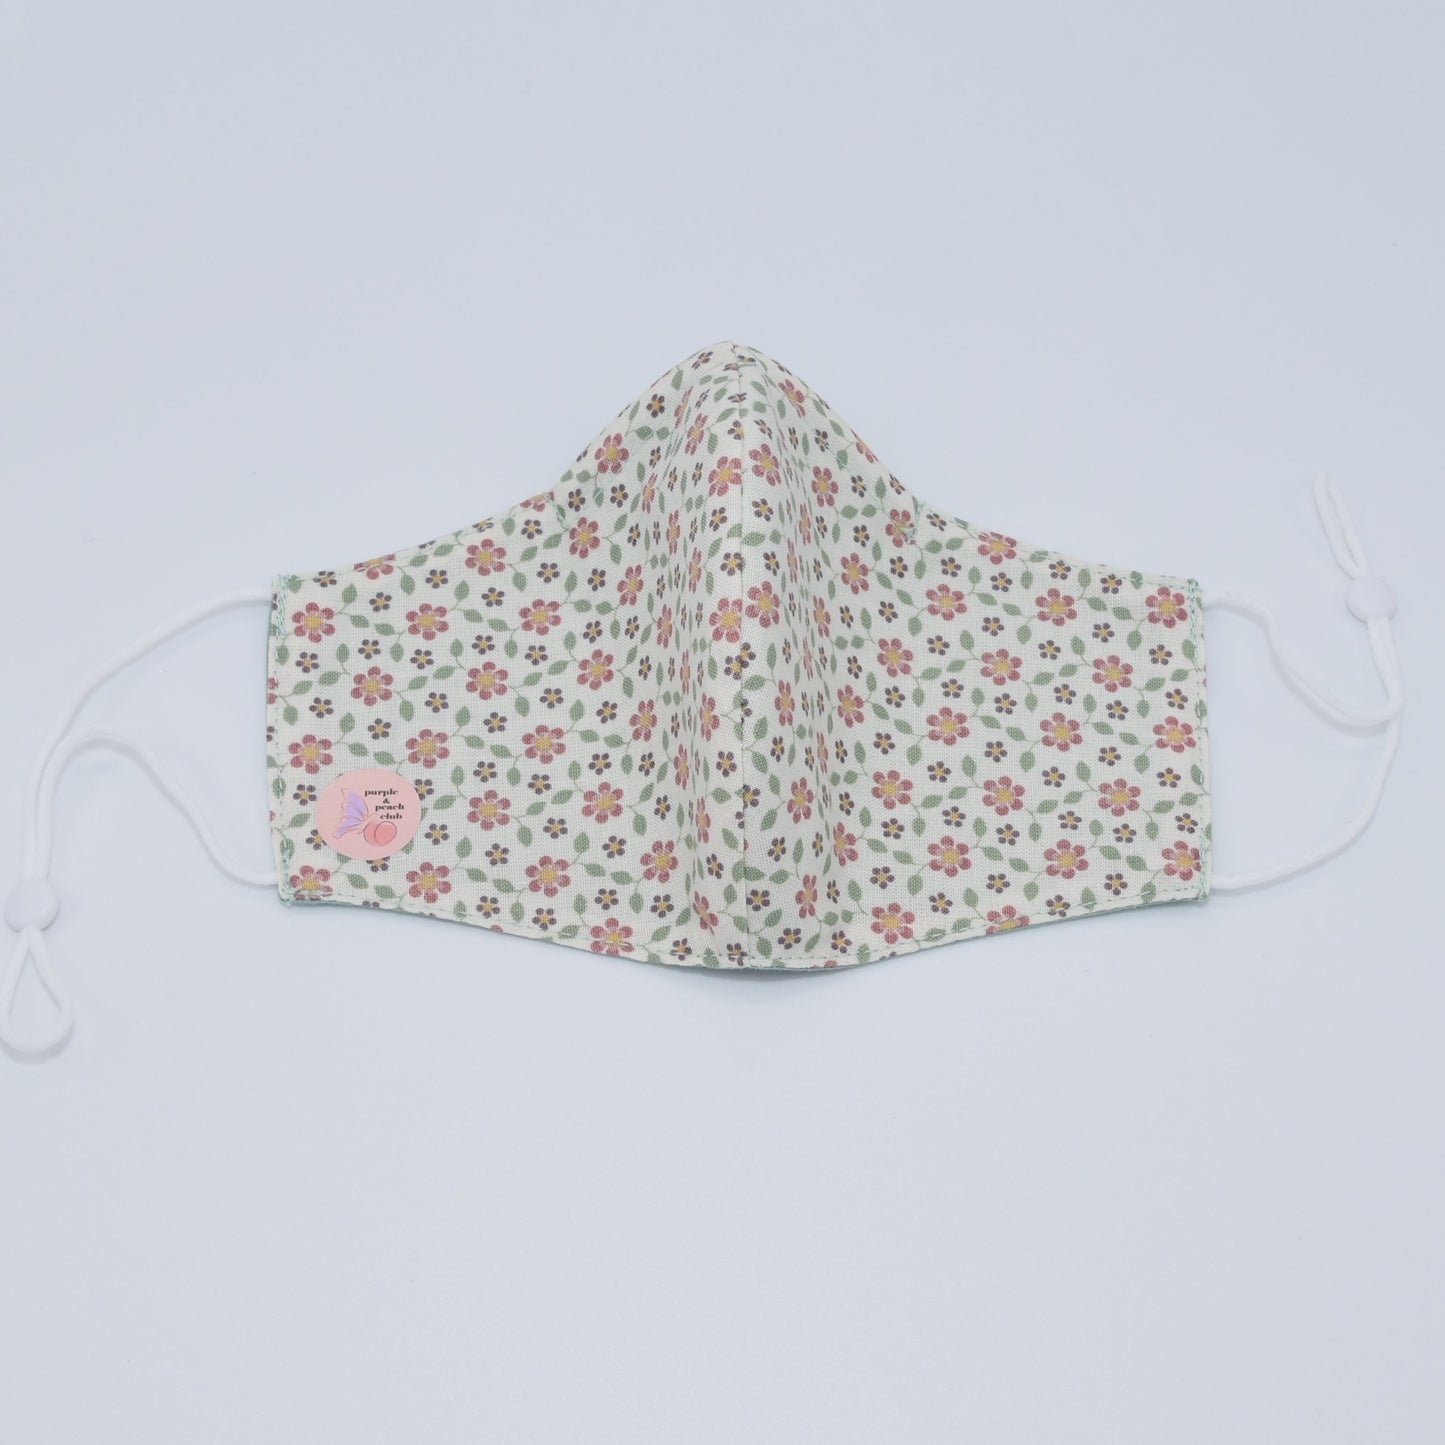 The simple flower details against the soft off-white cotton fabric make this mask a graceful accessory.  One of our lighter and softer designs. Reversible and double-layered. Built for comfort with an adjustable nose bridge and adjustable ear straps. 